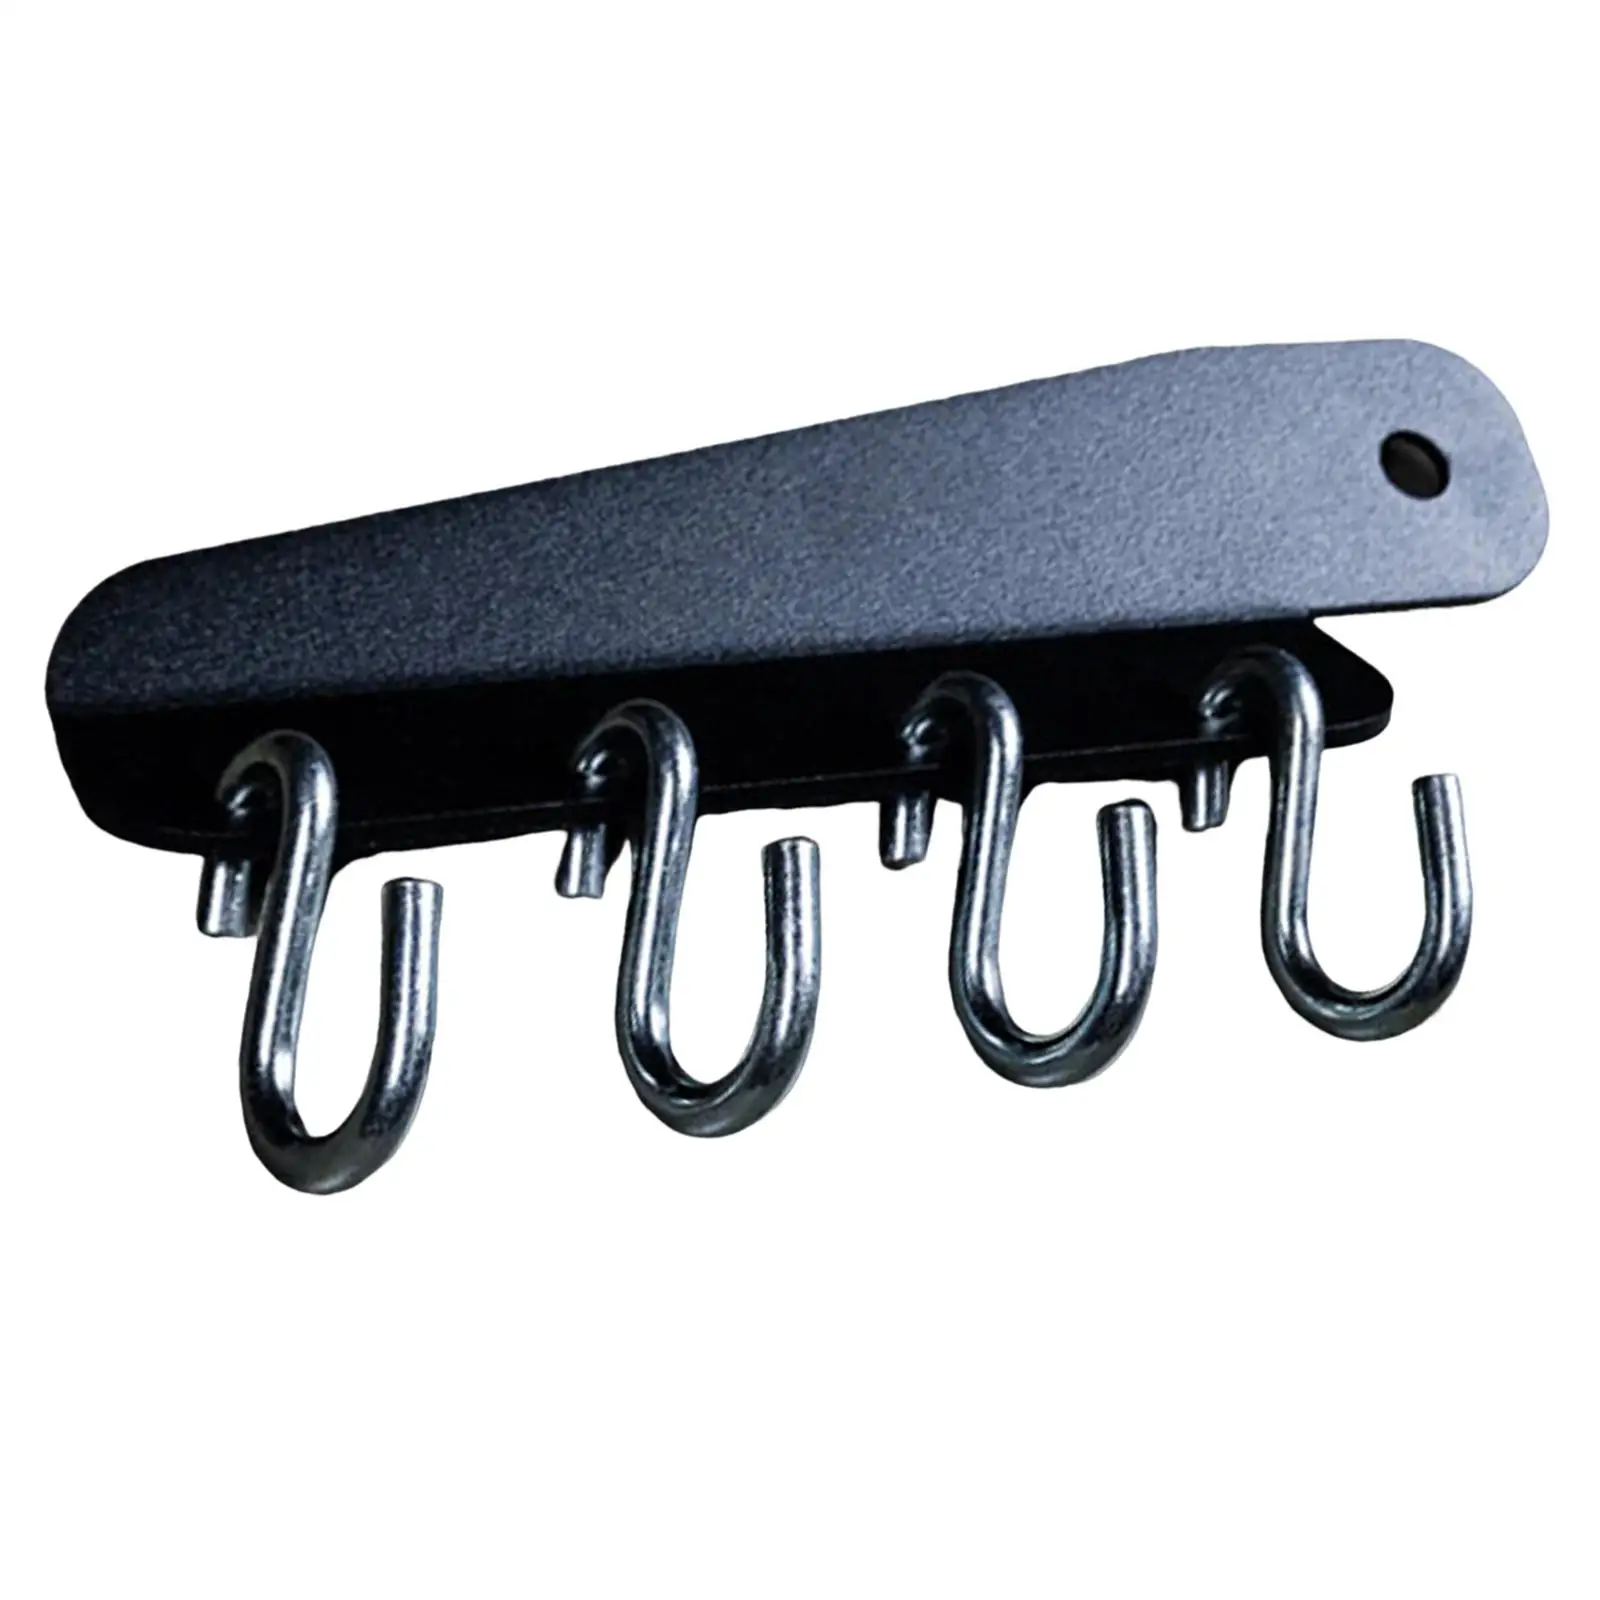 Gym Chains Rack Storage Holder Hanging Wall Mount Hanger for